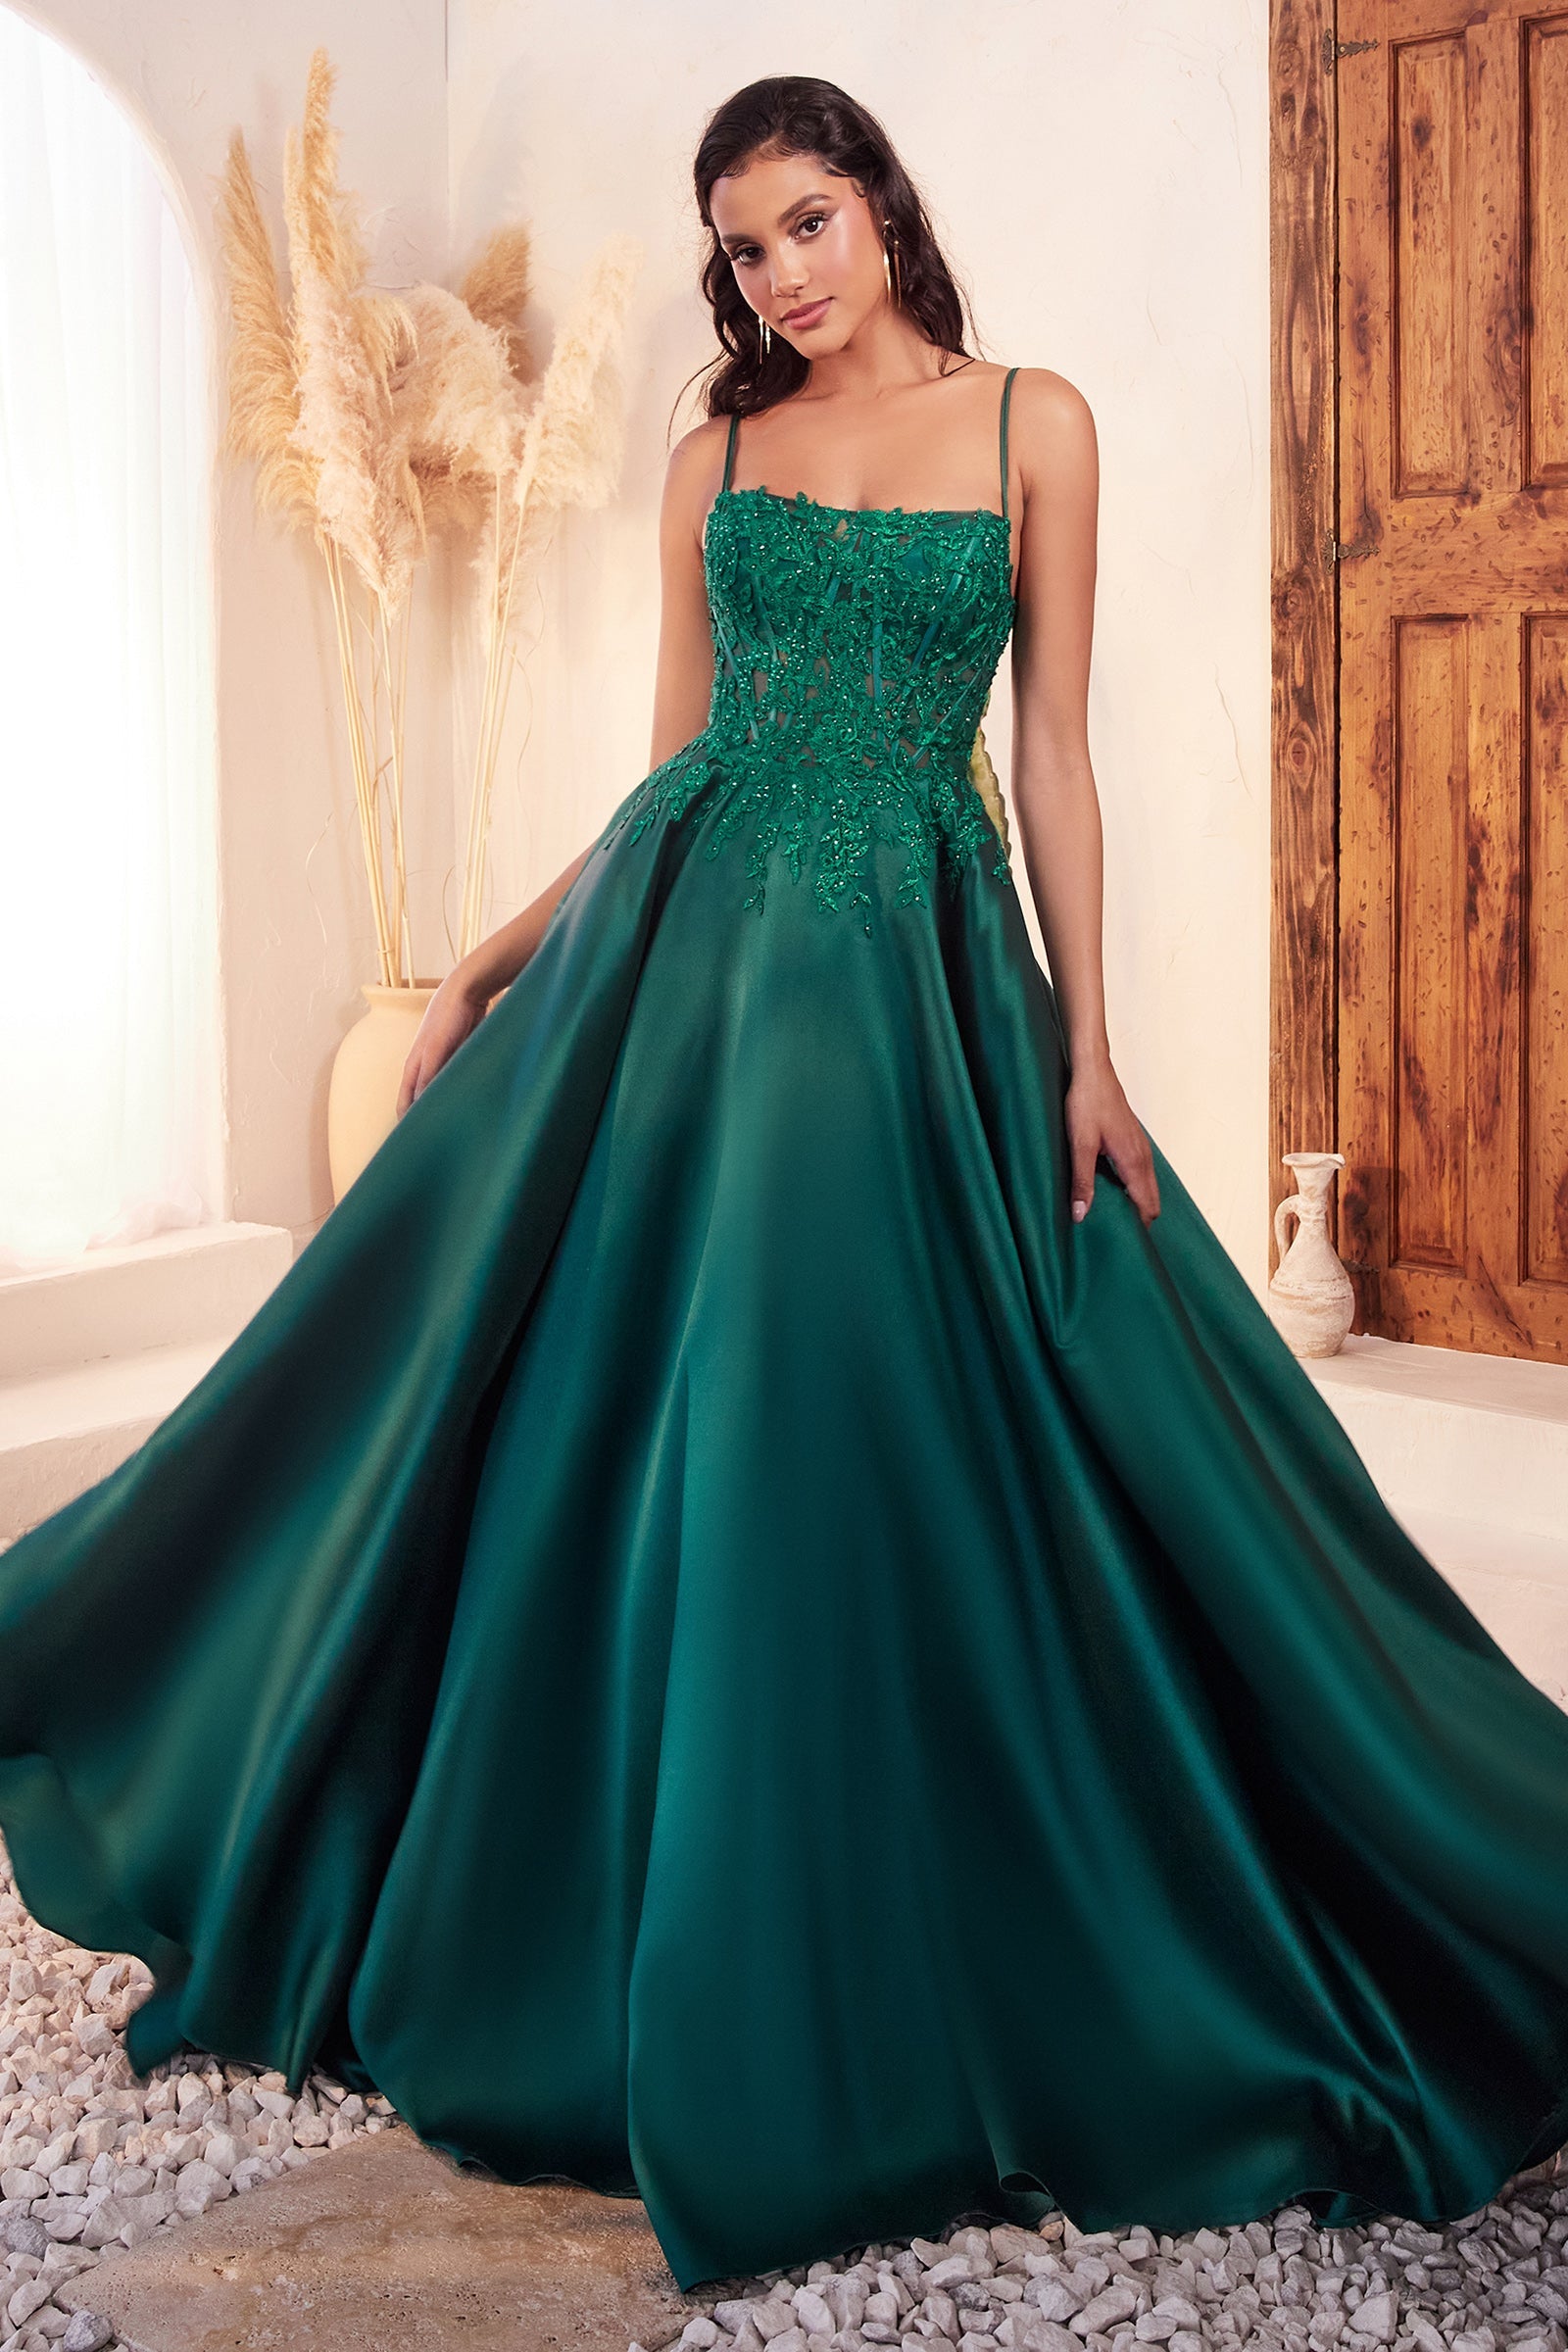 PURDIE Emerald Green Mikado Satin Lace A Line Ball Gown Prom & Formal Dress